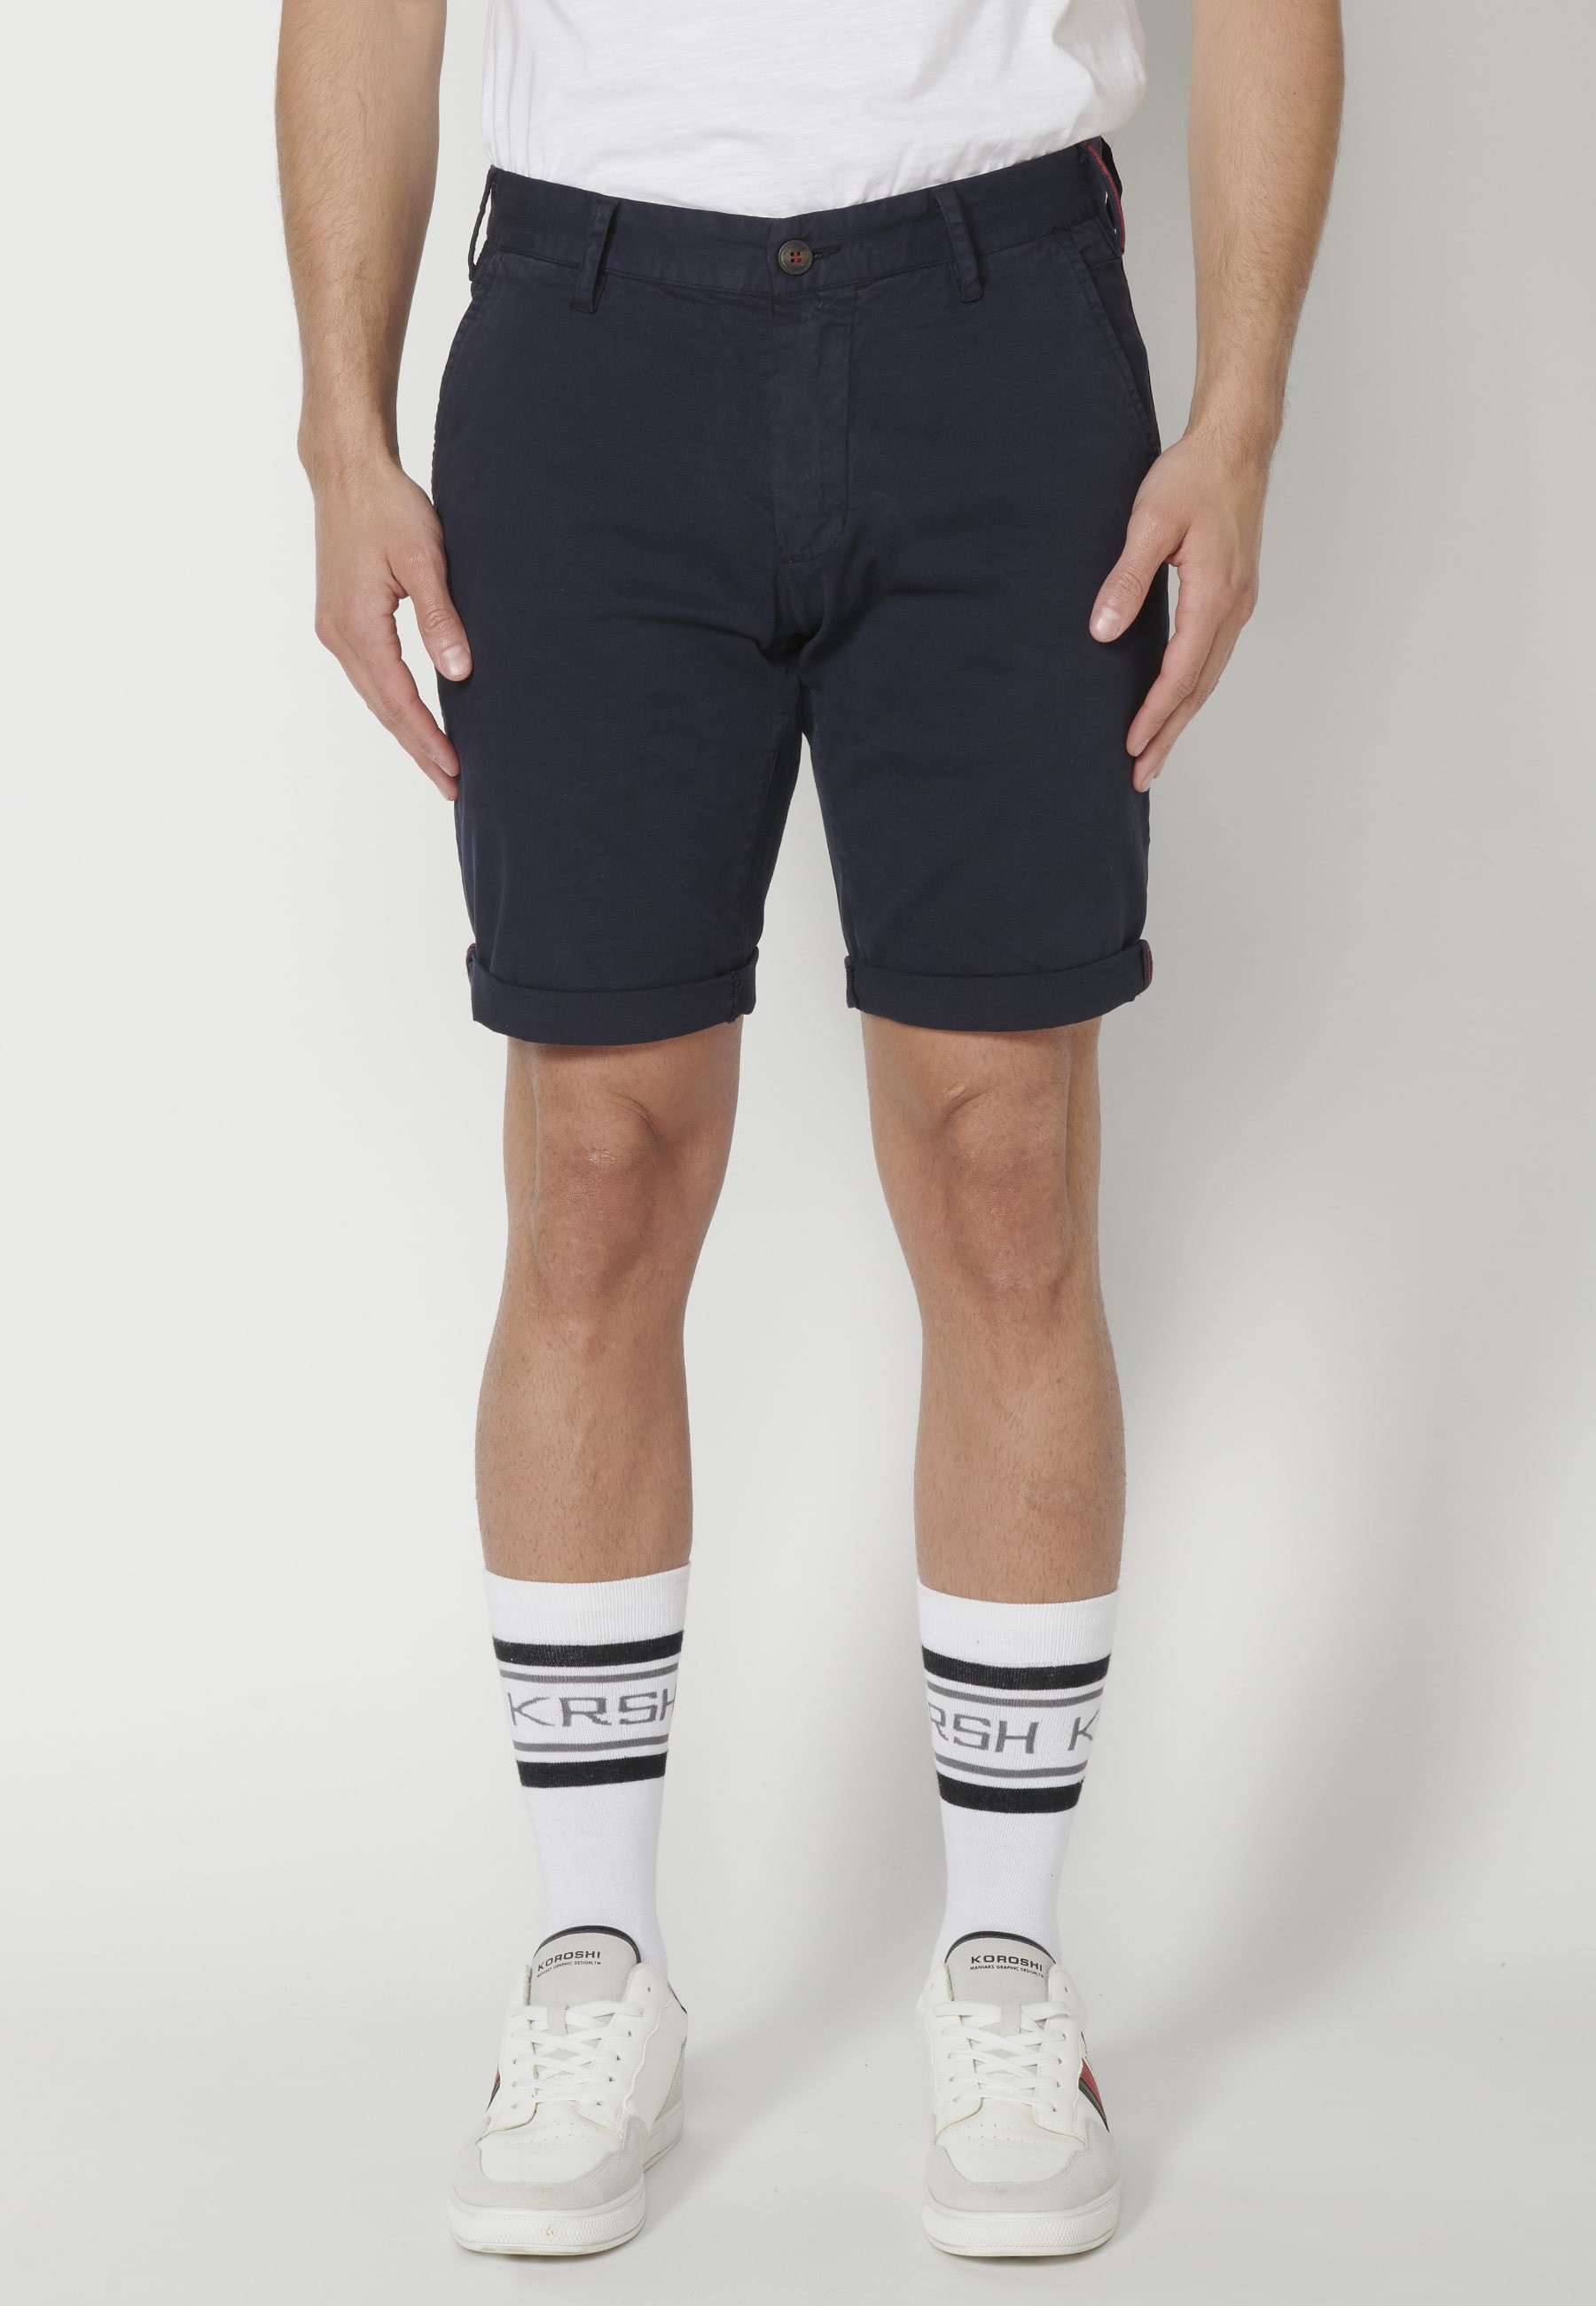 Navy Chinese style Bermuda shorts for Men